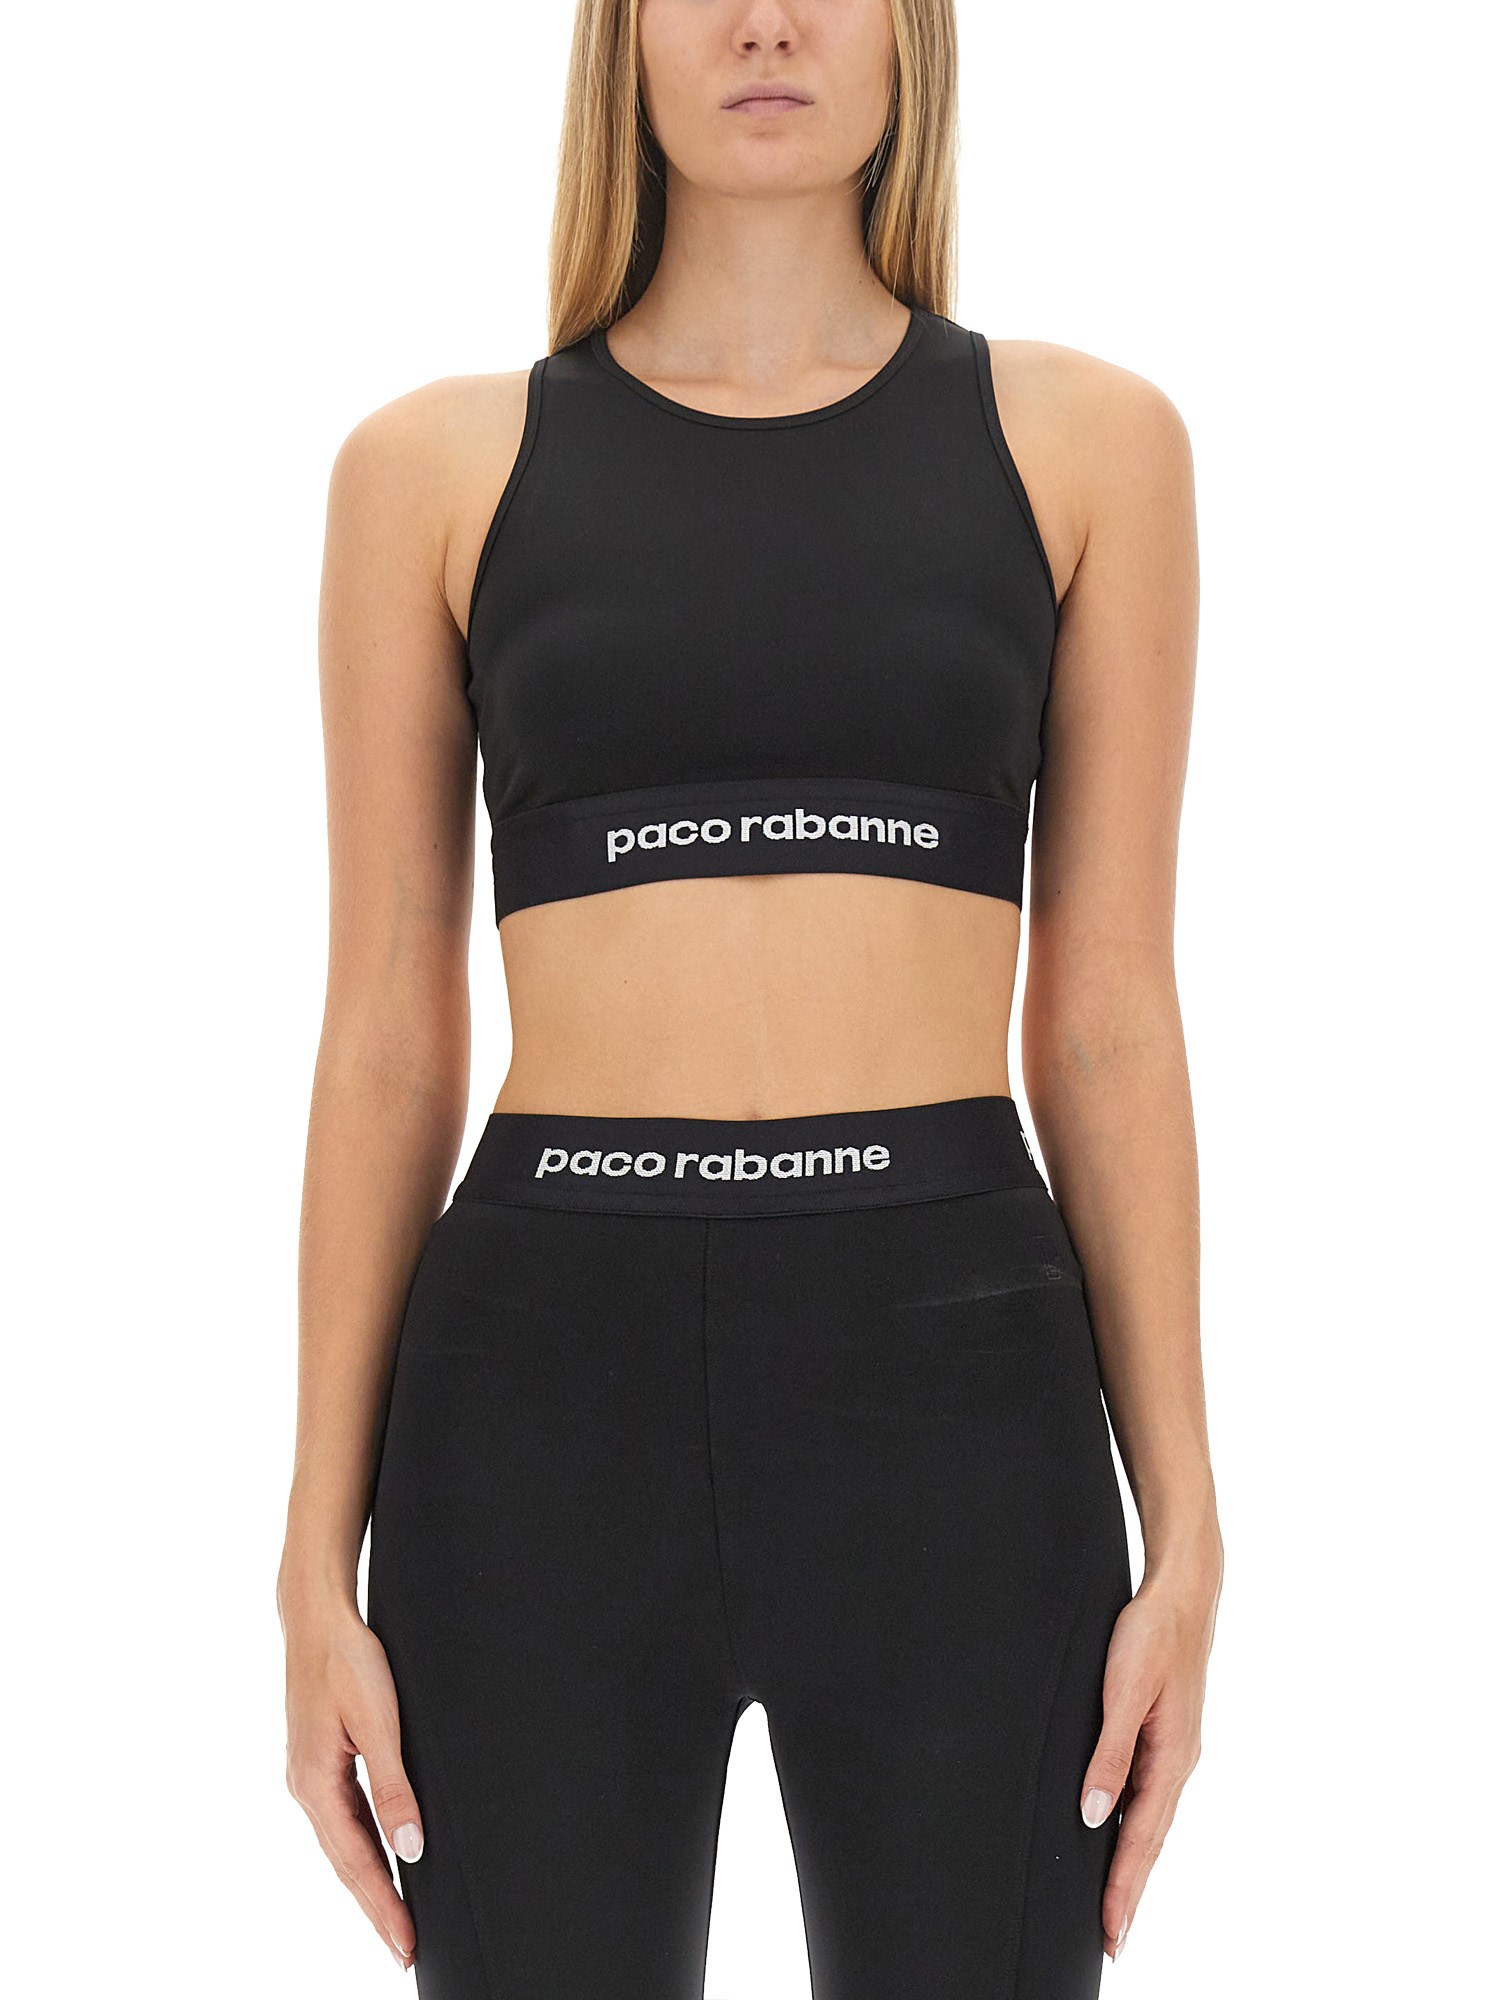 paco rabanne tops with logo